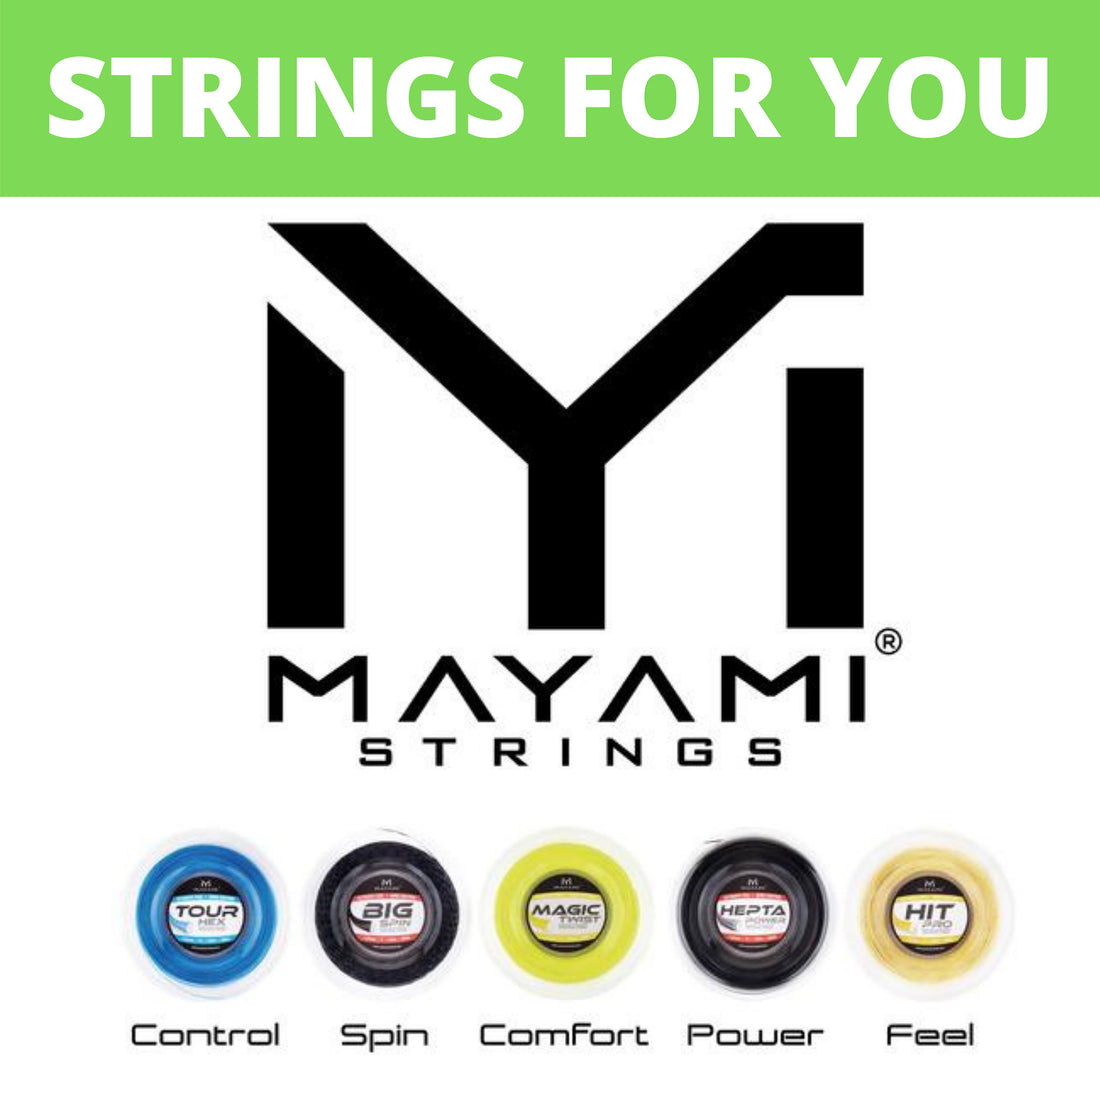 Tennis string price and quality